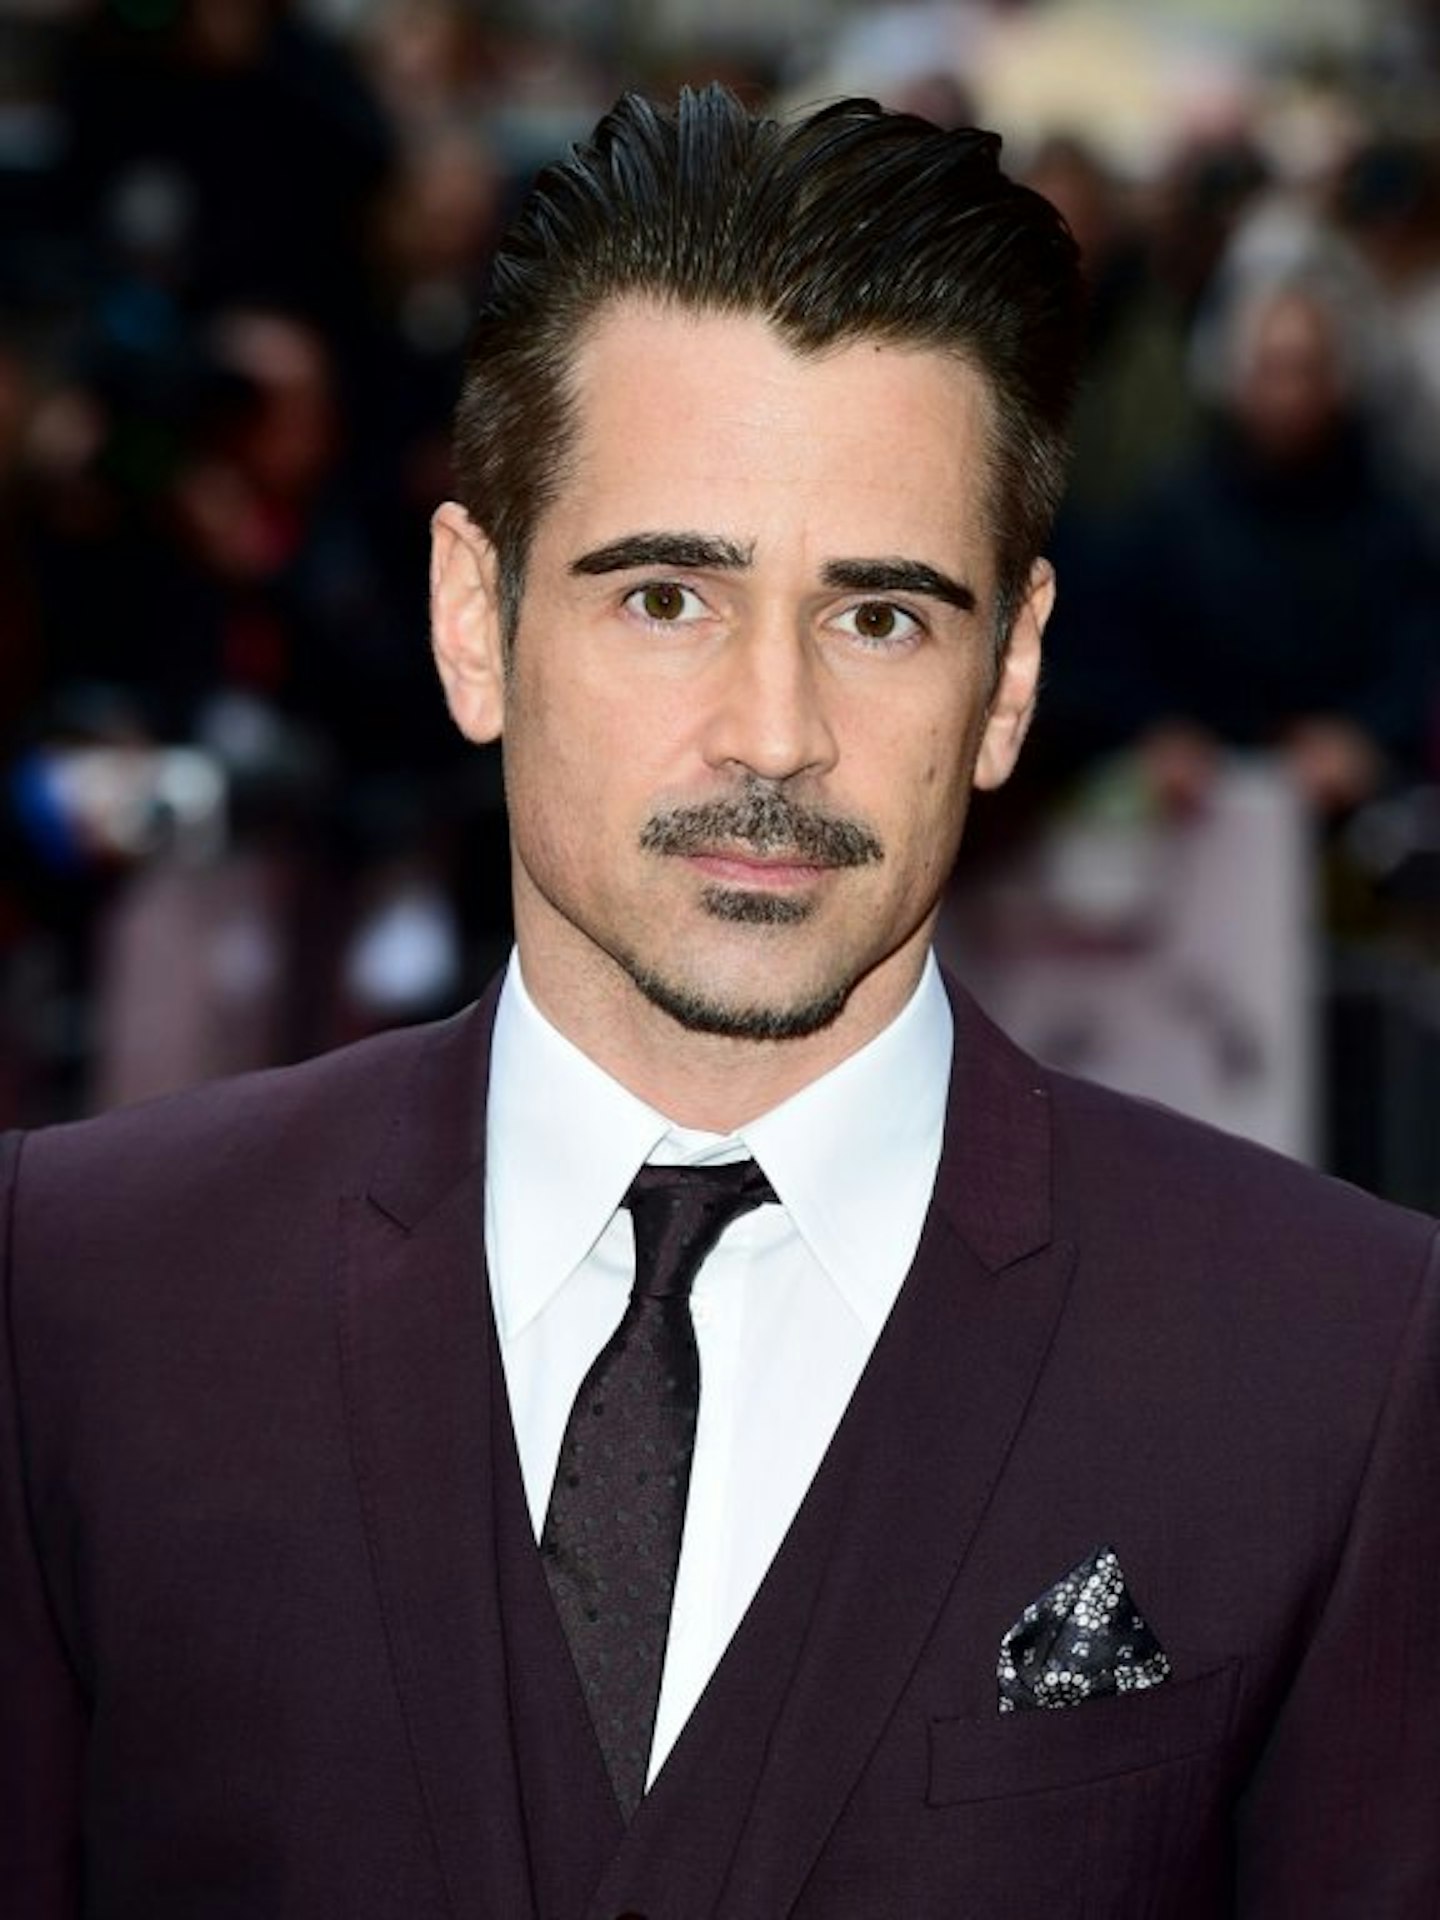 Colin Farrell, actor (In Bruges)